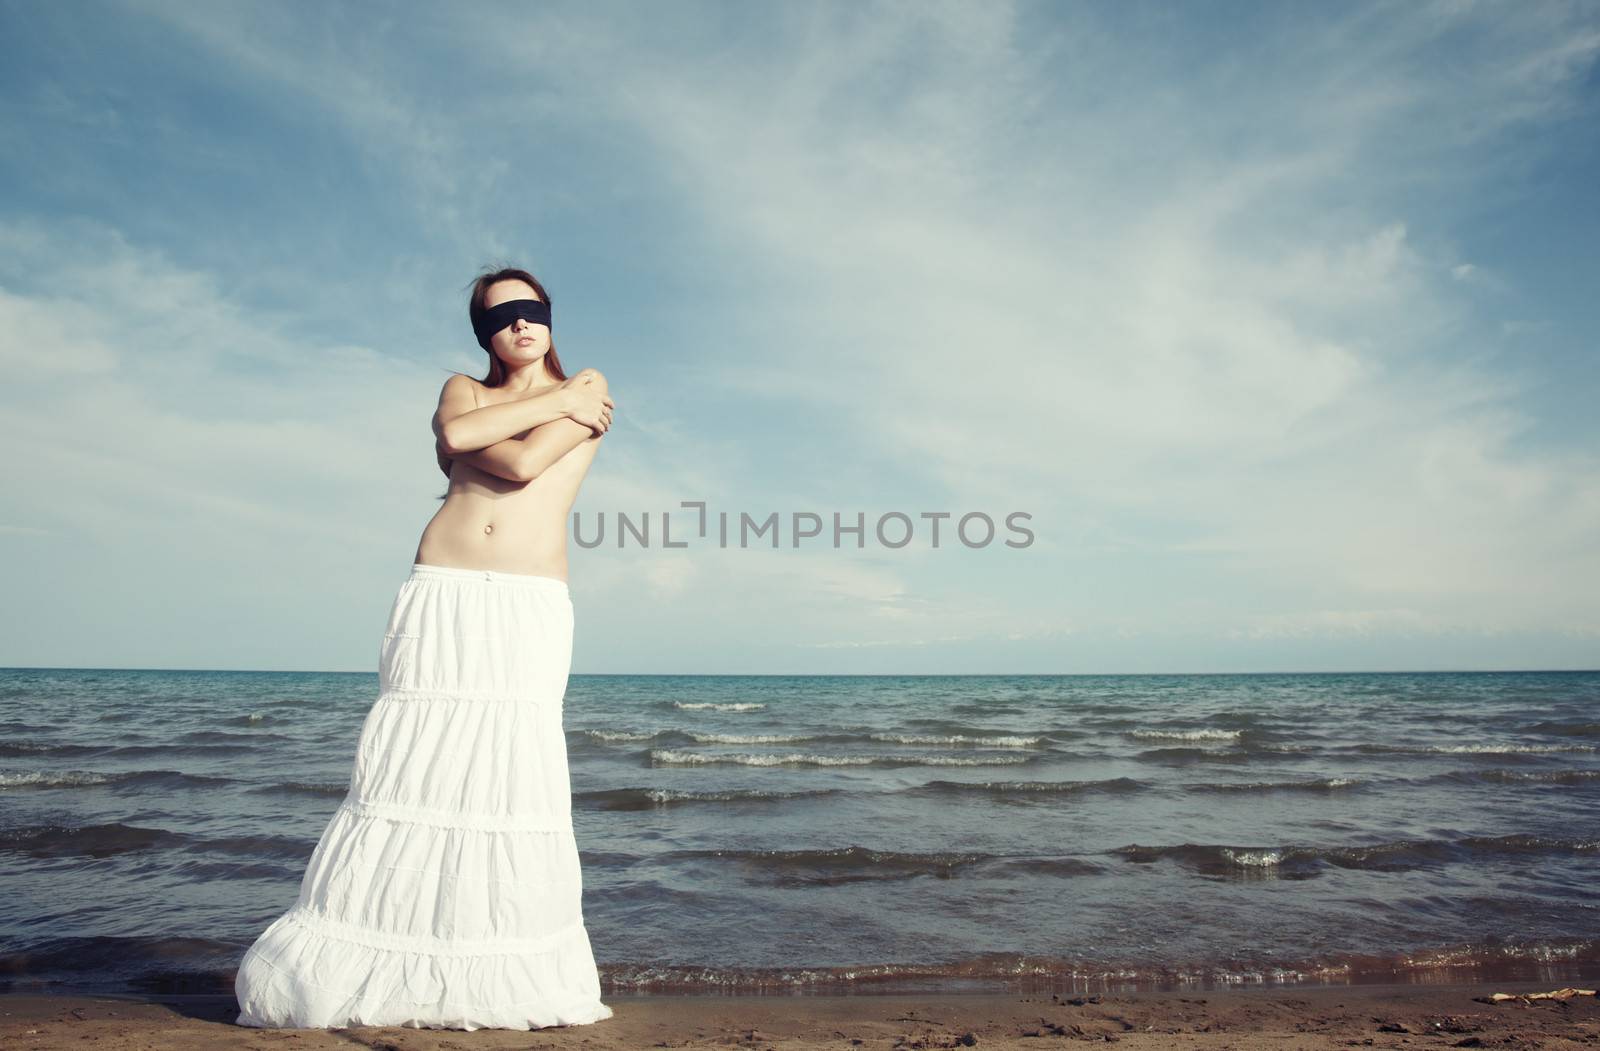 Lady with blindfold stands at the beach